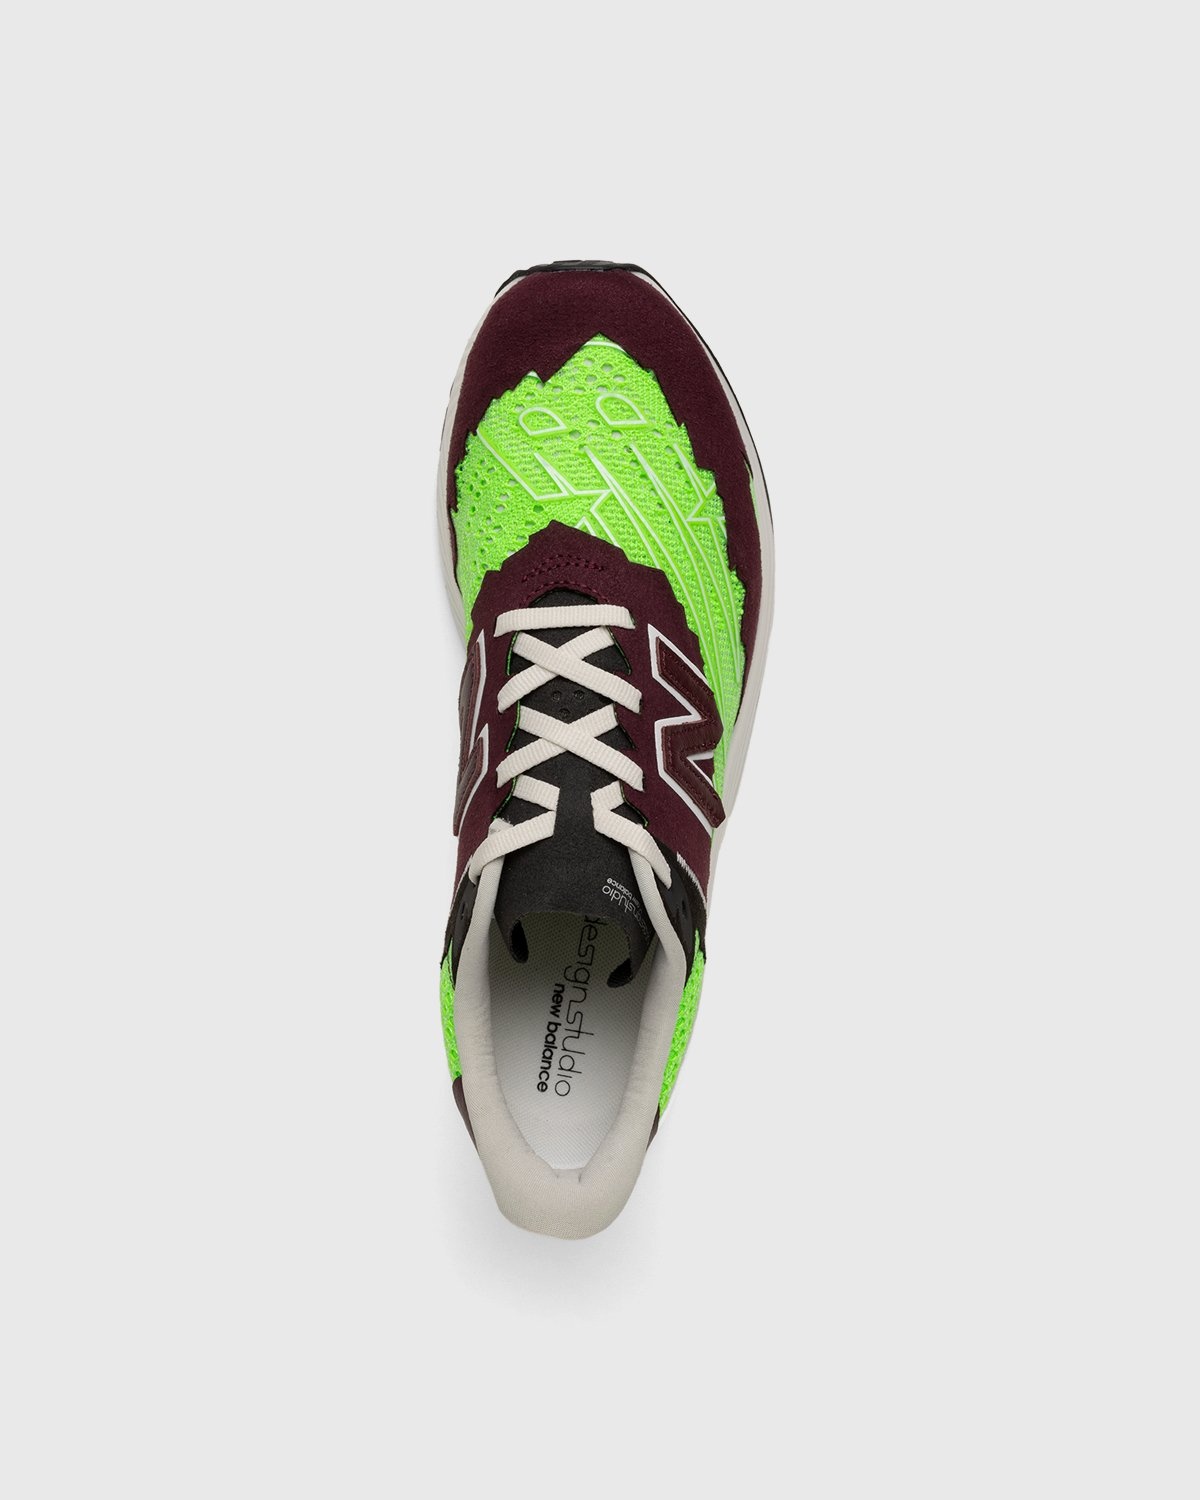 New Balance x Stone Island – FuelCell RC Elite v2 Energy Lime - Sneakers - Green - Image 5